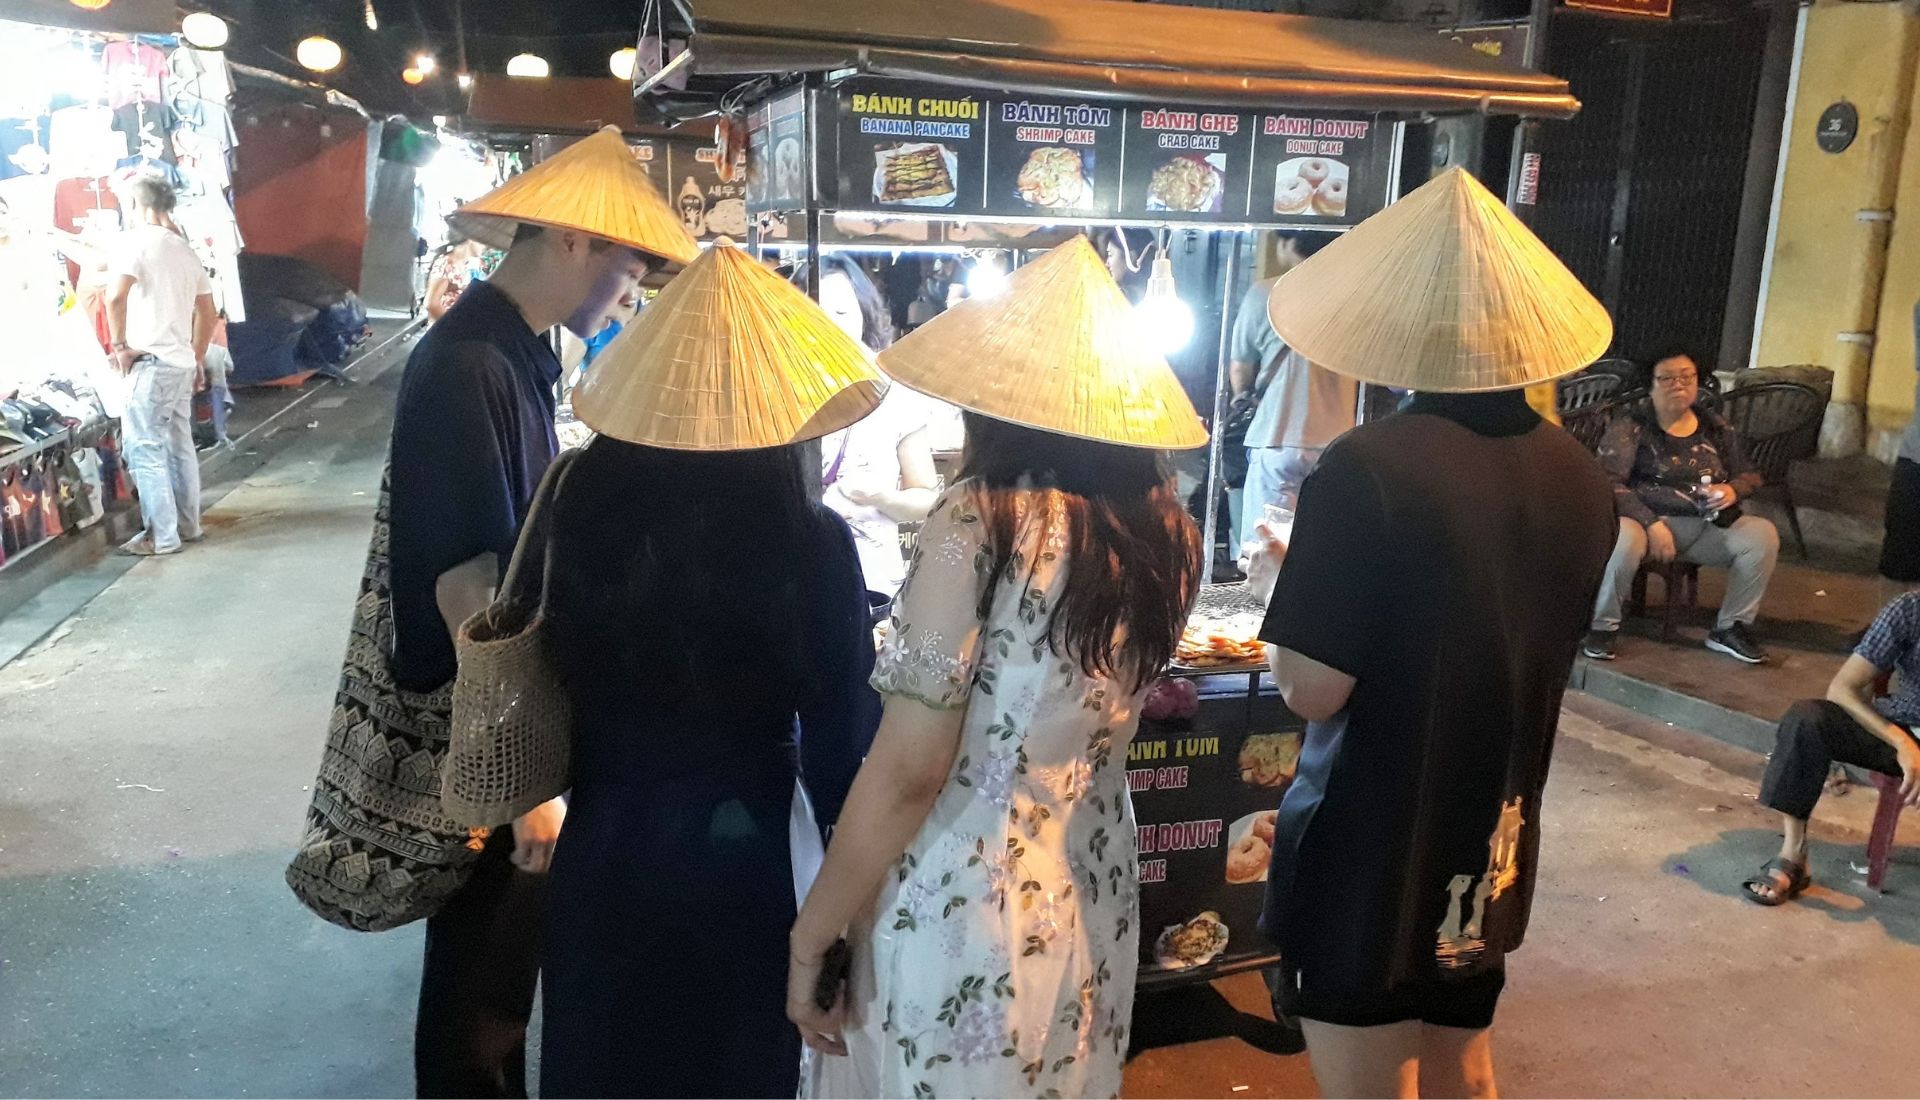 Popular conical hats